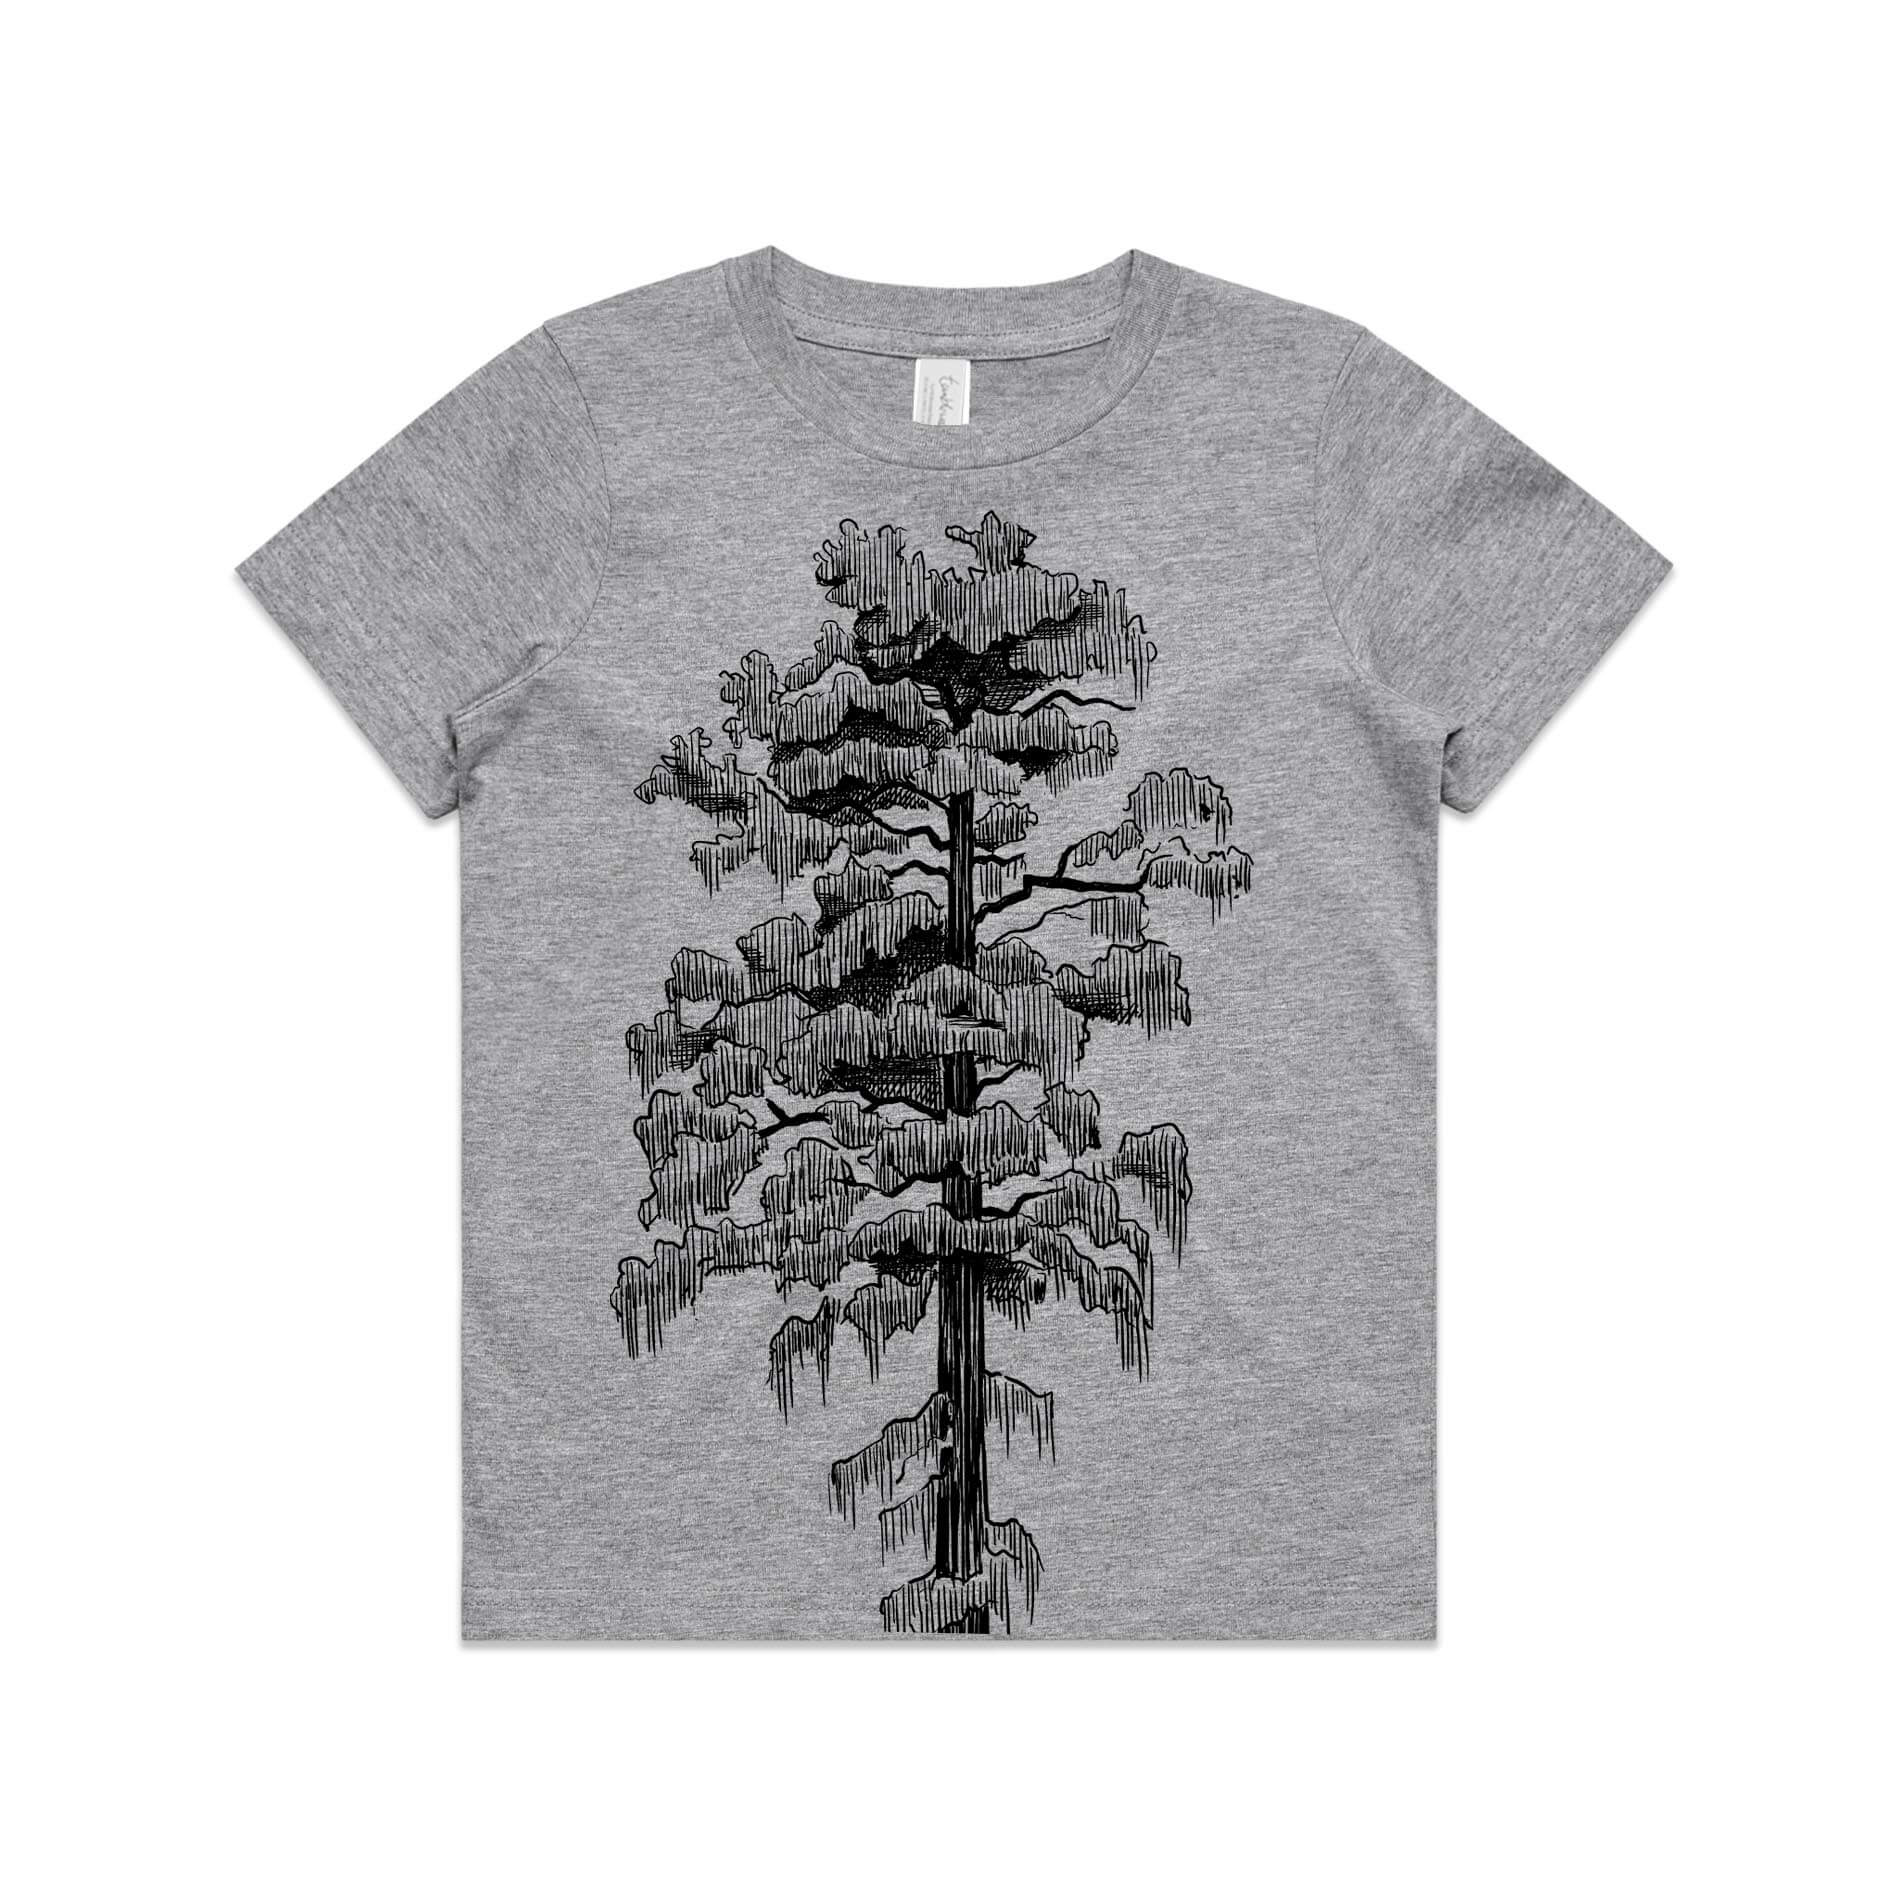 Grey marle, cotton kids' t-shirt with screen printed rimu design.